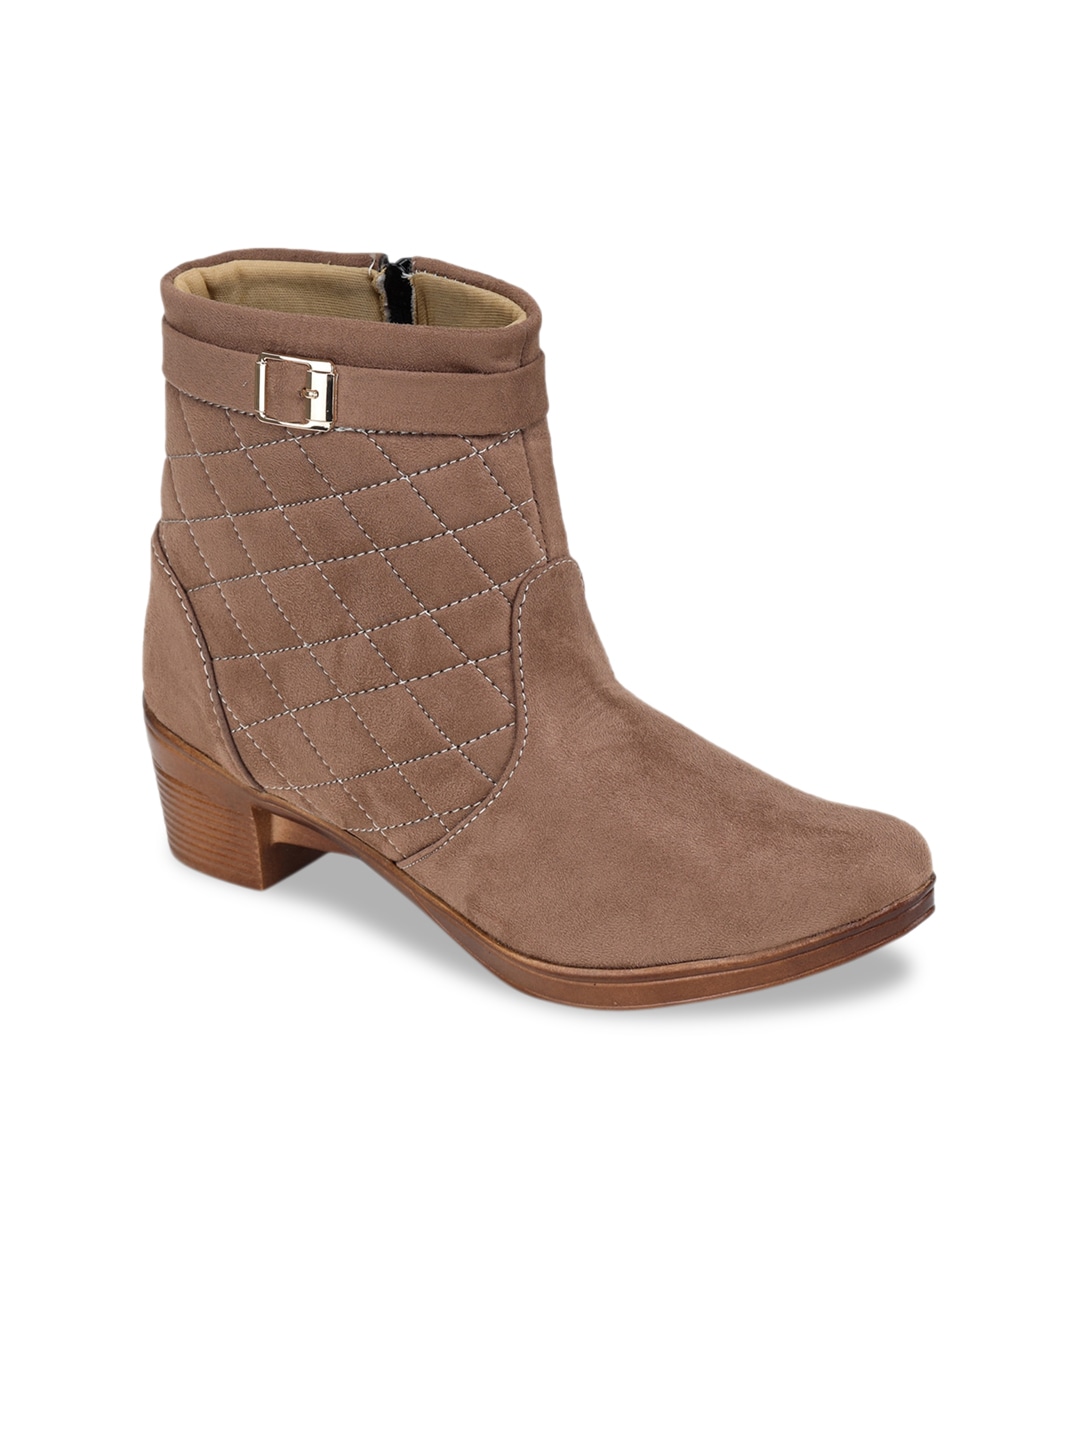 TRASE Women Beige Woven Design Heeled Boots Price in India